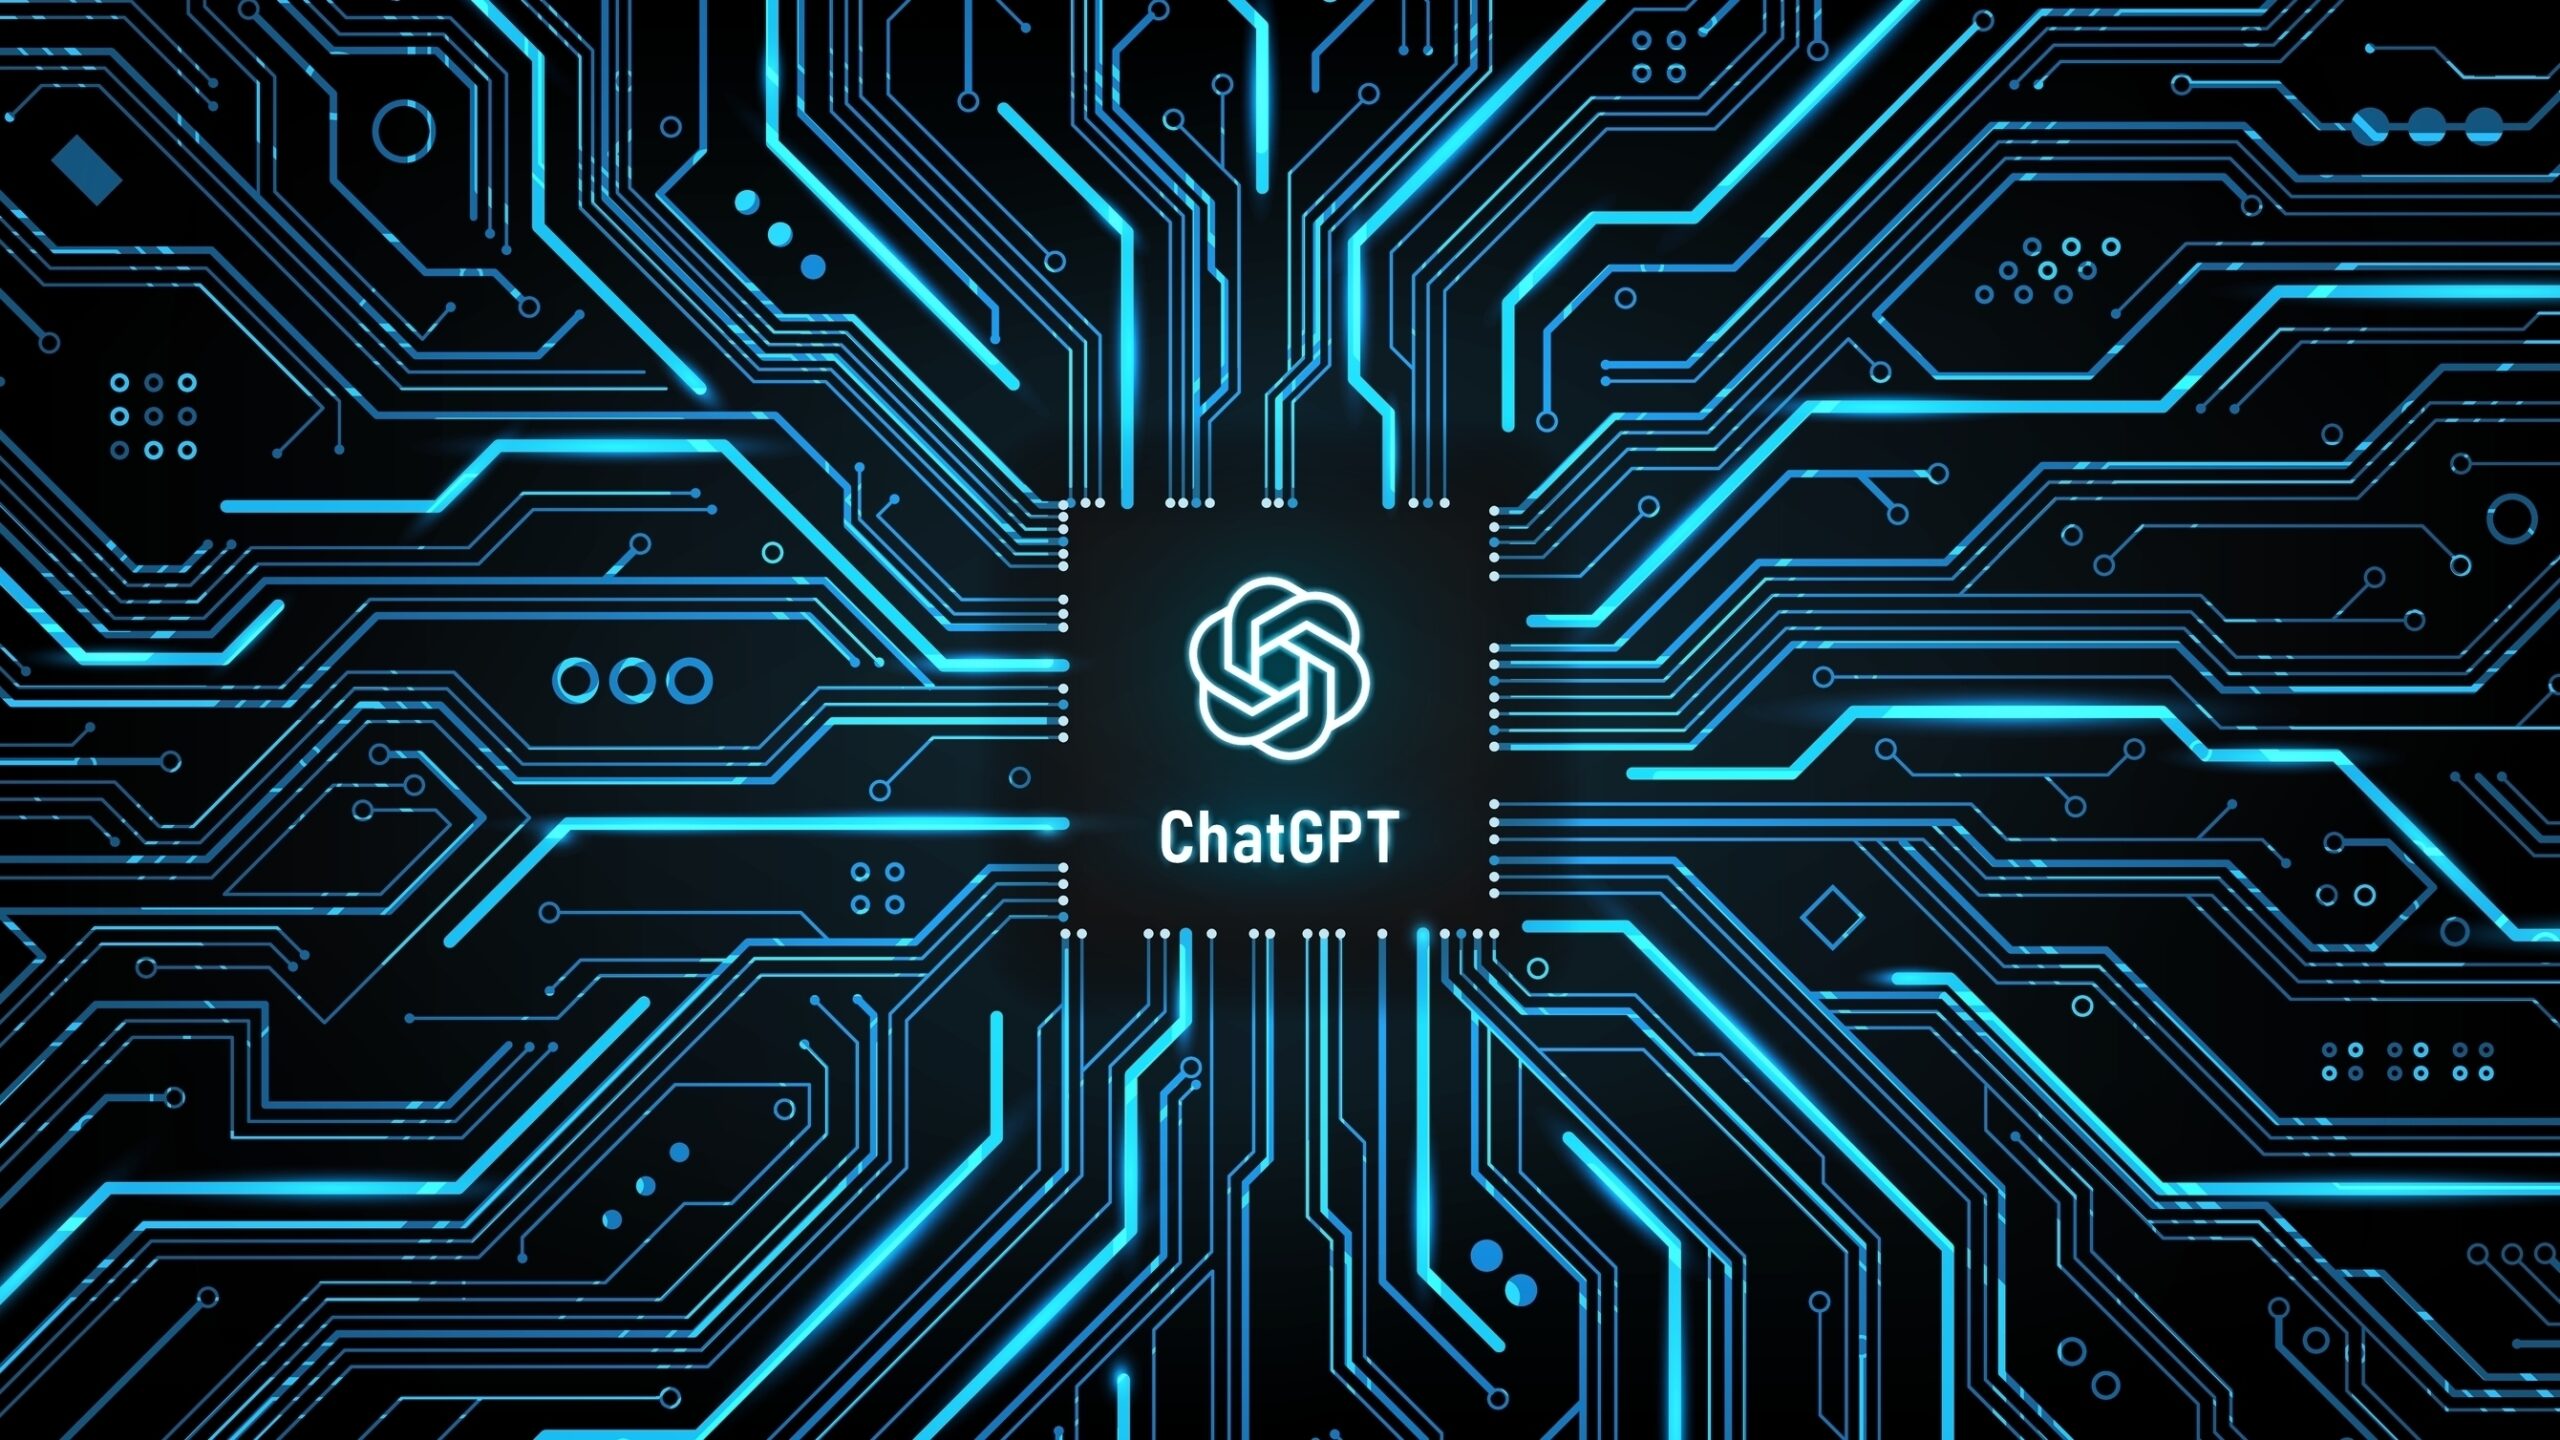 blue circuitry with the ChatGPT logo in the center